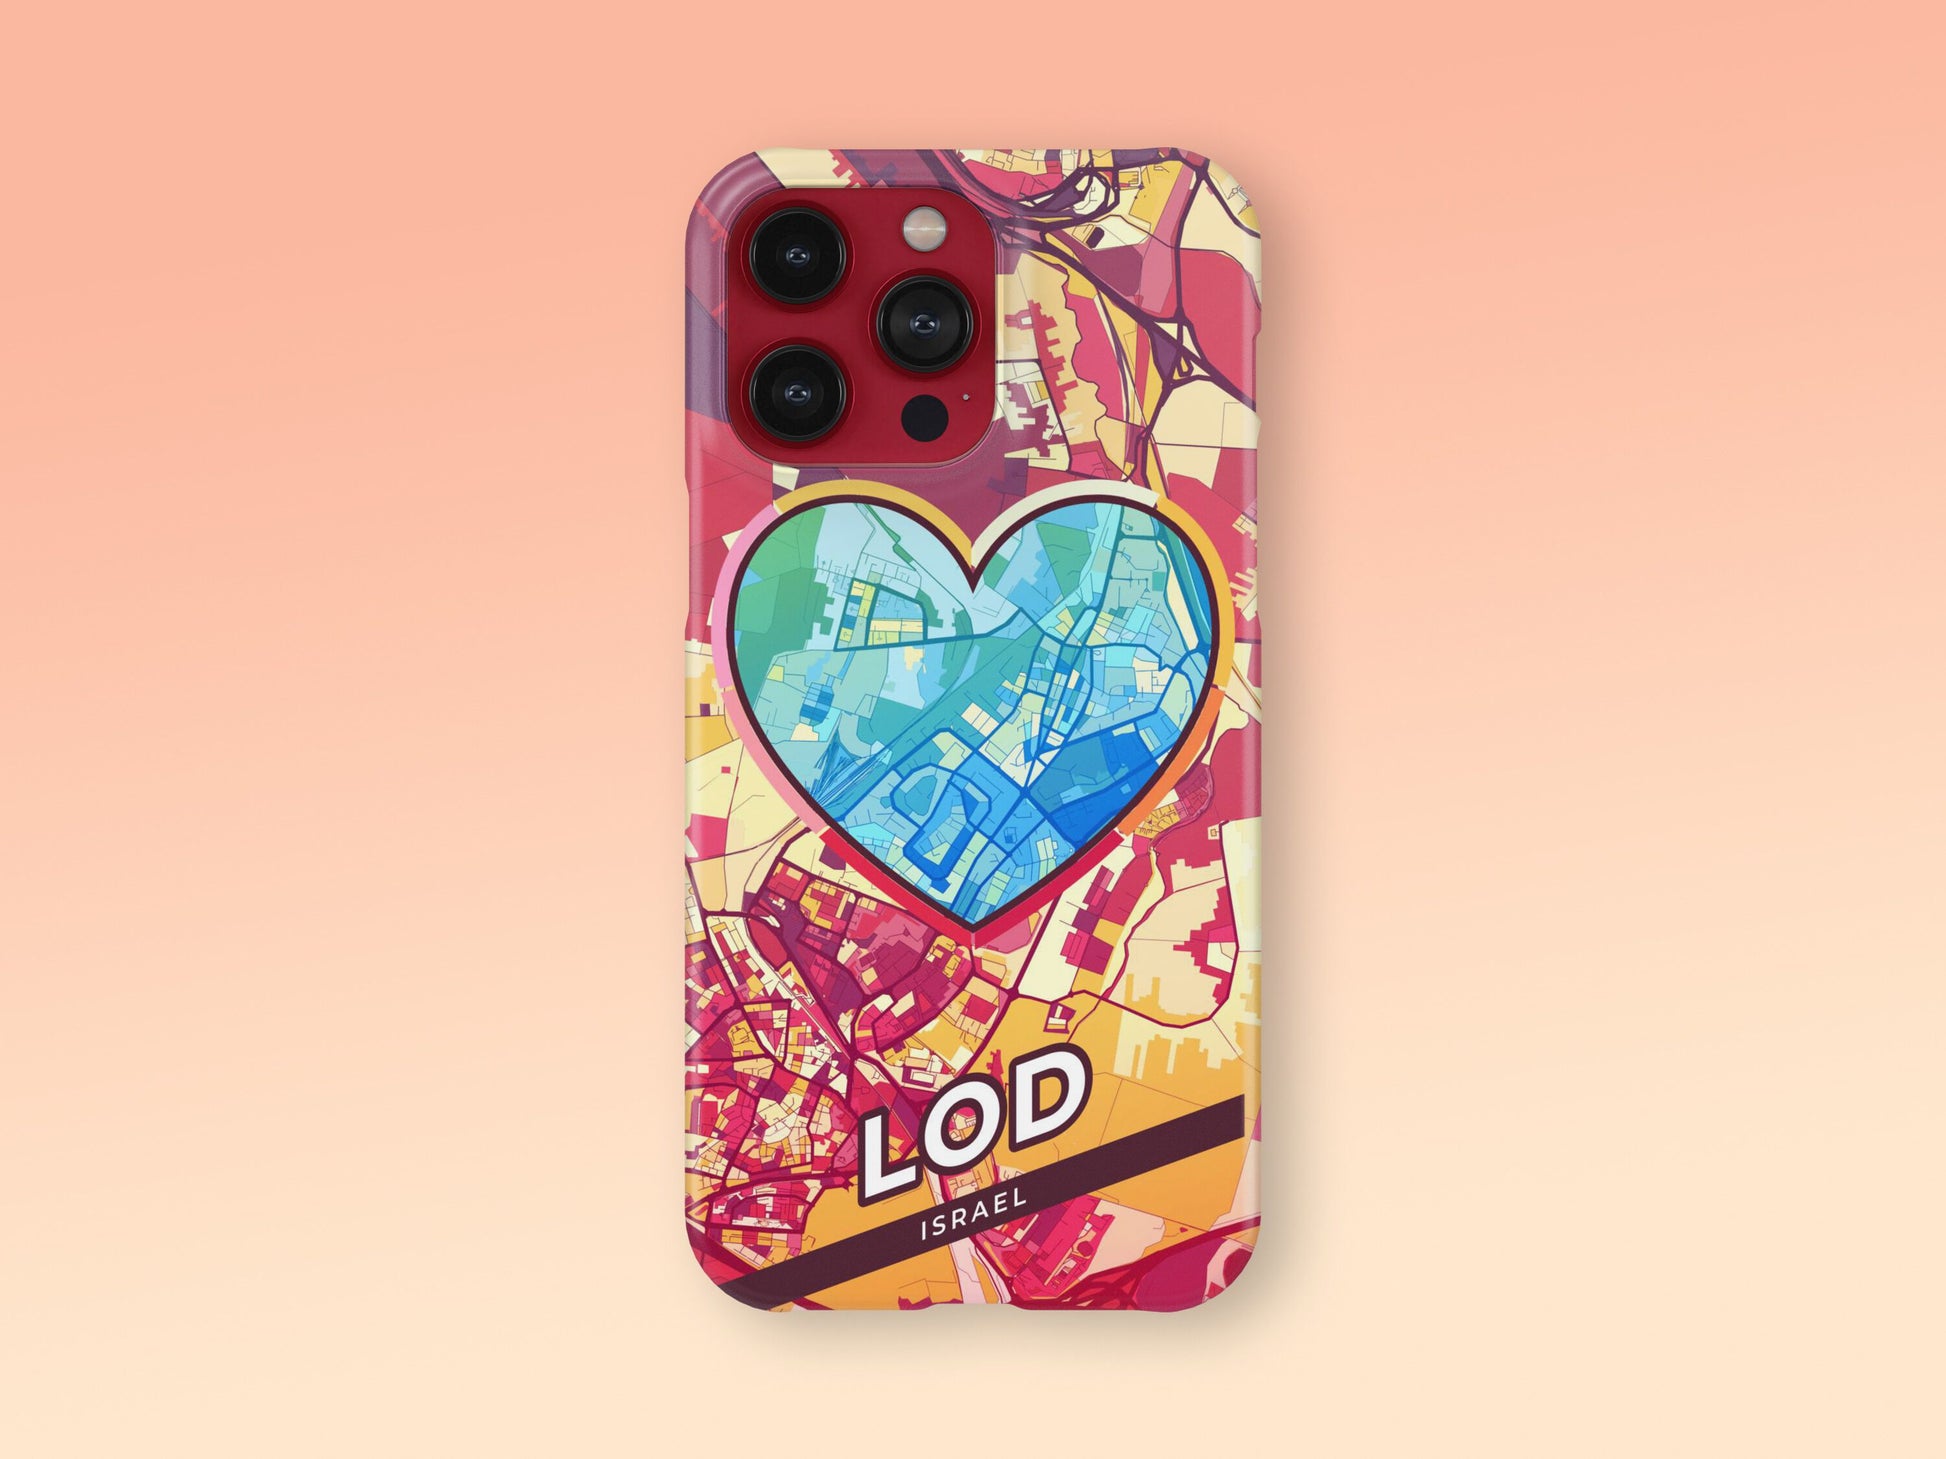 Lod Israel slim phone case with colorful icon. Birthday, wedding or housewarming gift. Couple match cases. 2